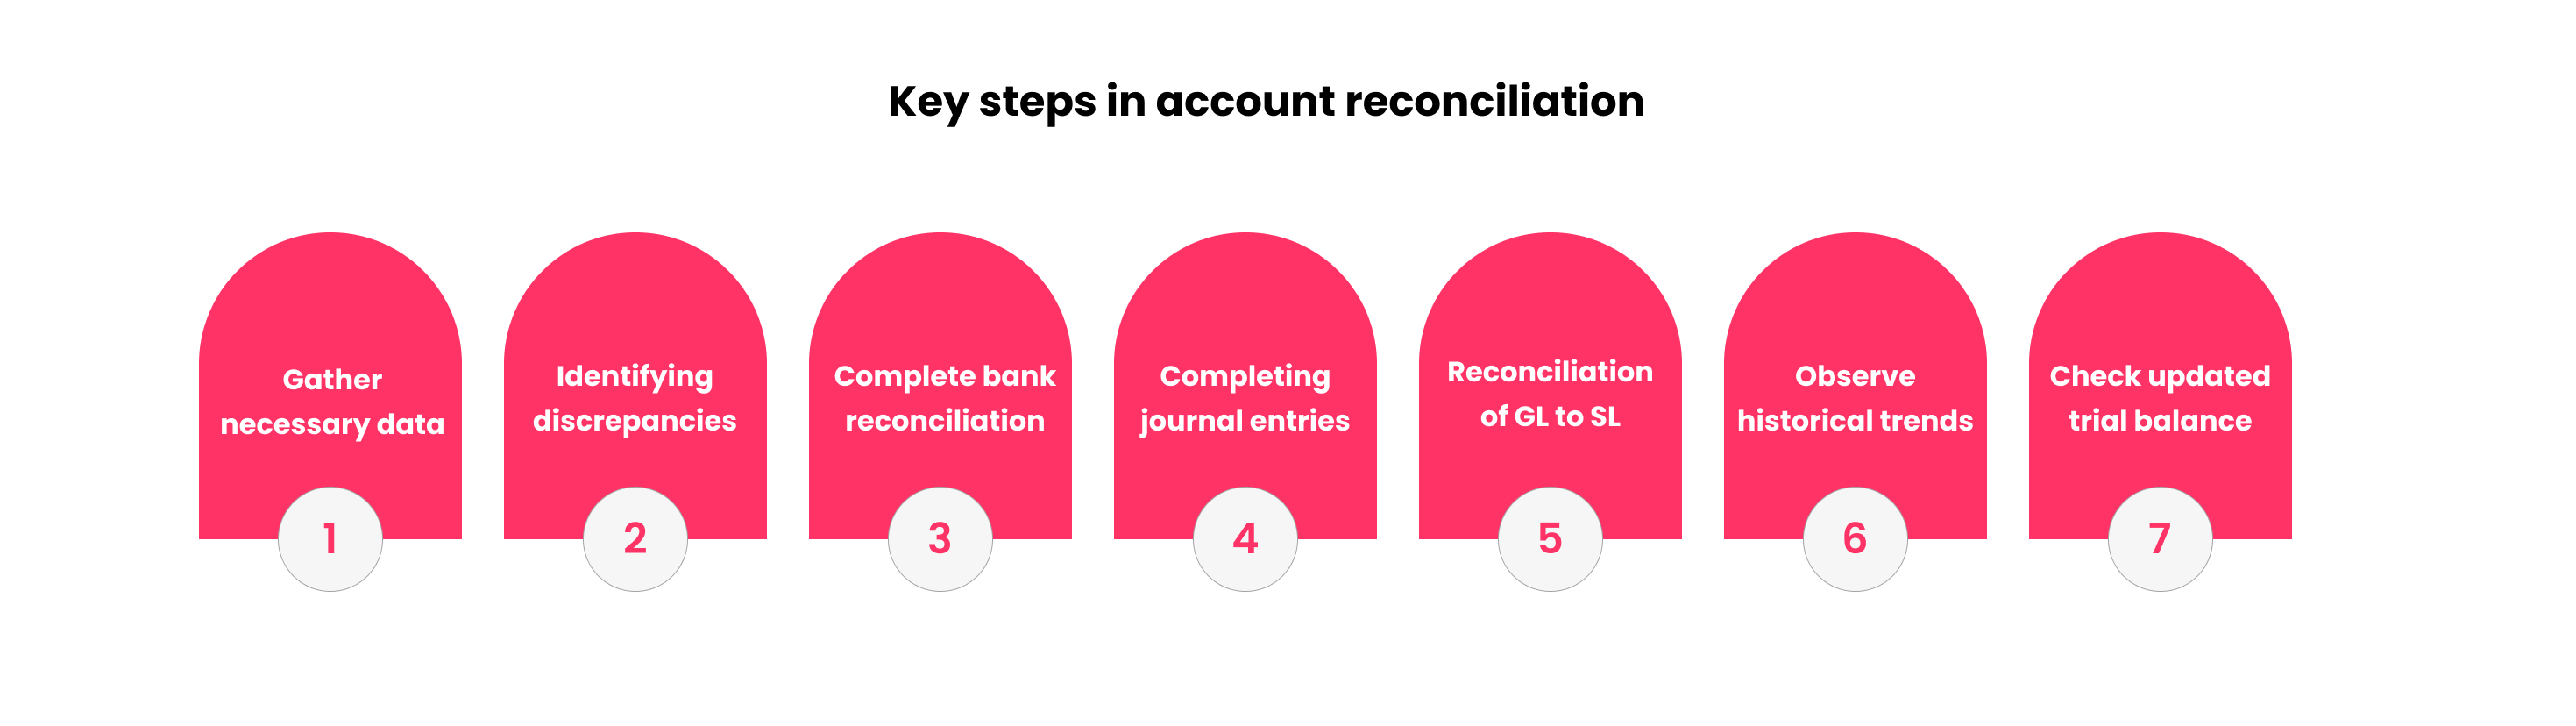 Key steps in account reconciliation